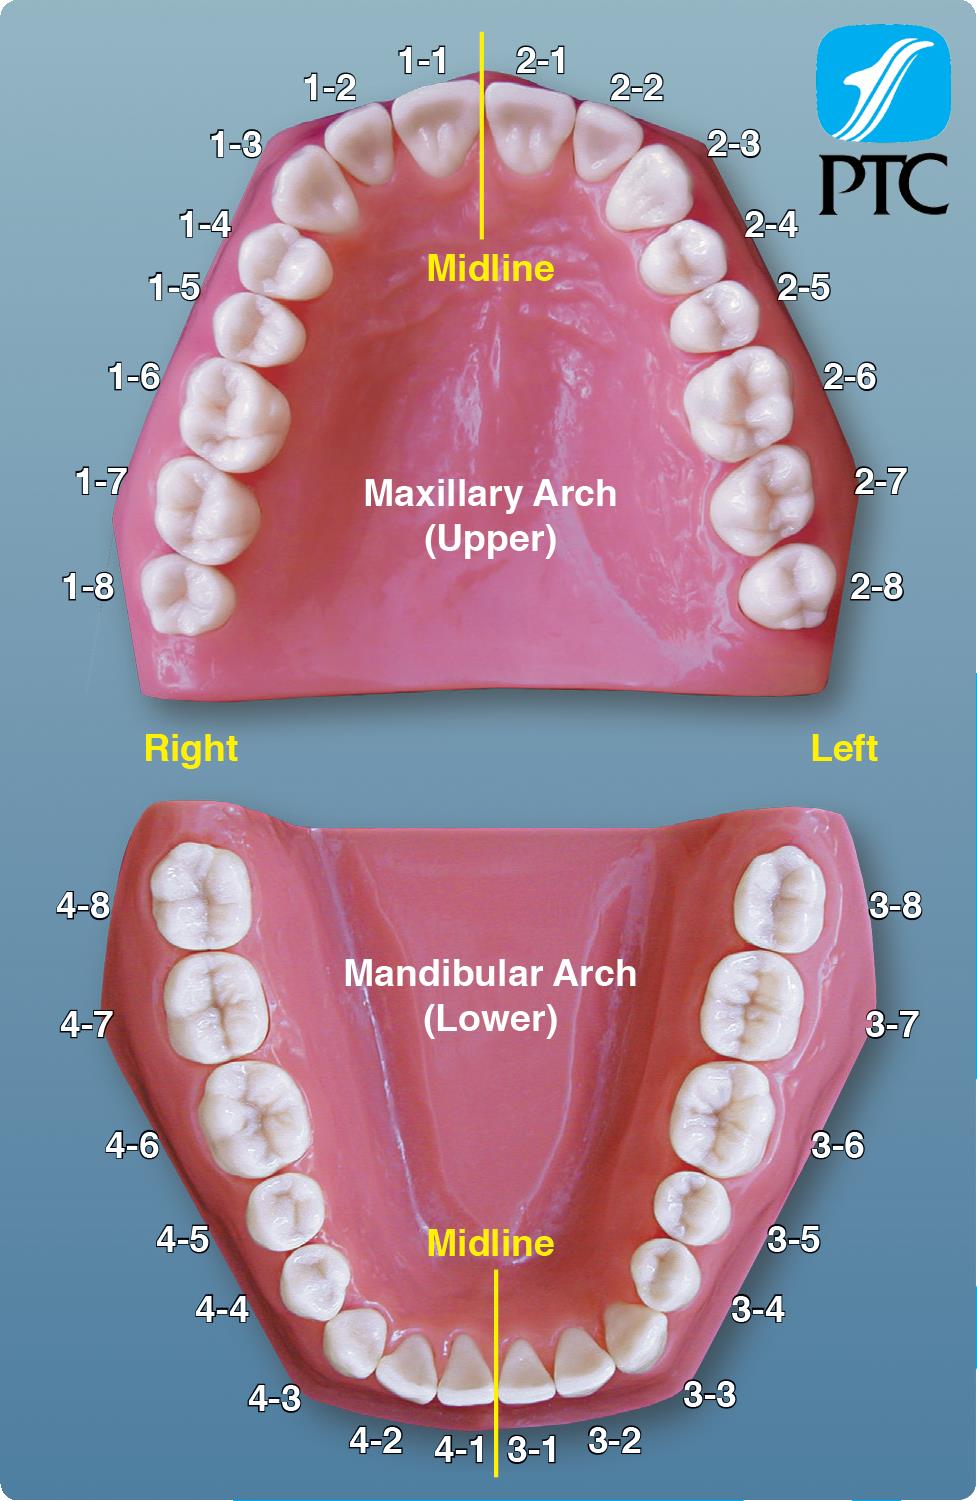 Dental Charts To Understand Tooth Numbering System Tooth Chart: A ...